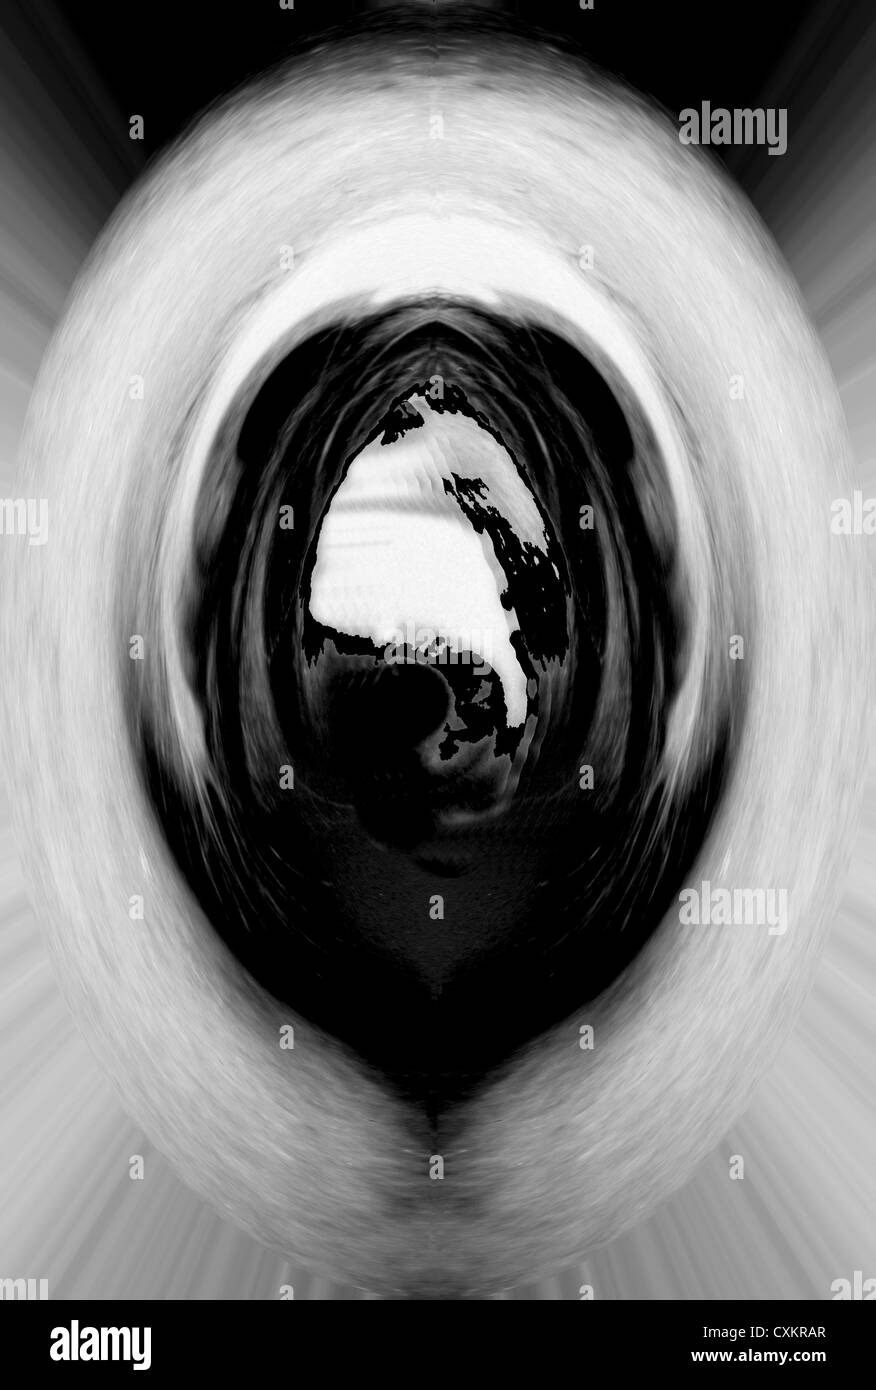 Abstract black and white photo resembling eye or lense, opening Stock Photo